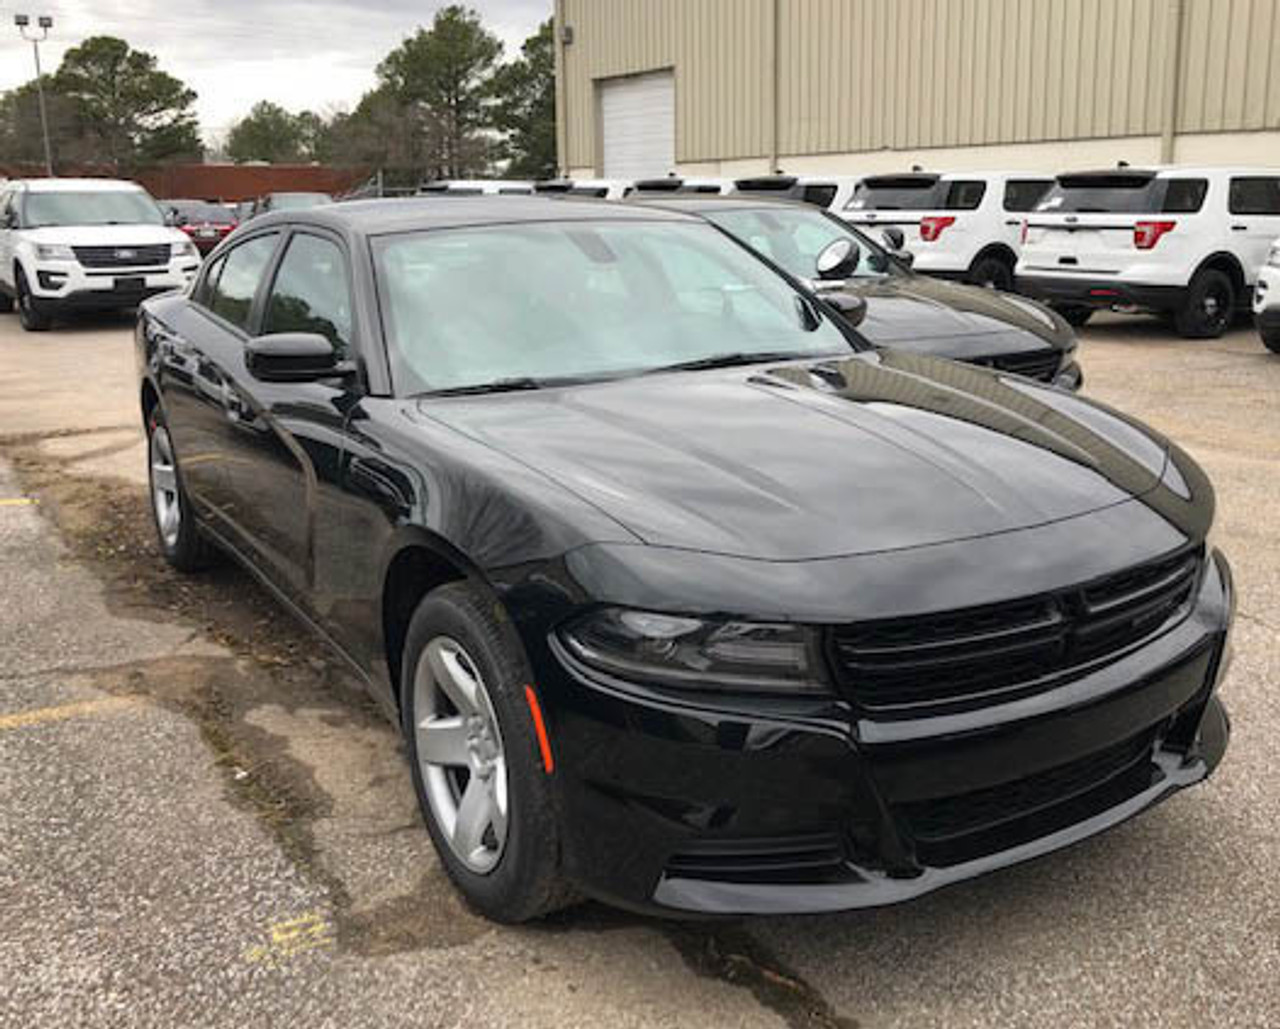 New 2023 Black Dodge Charger PPV V8 RWD ready to be built as a Marked Patrol Package Police Pursuit Car (Emergency Lighting, Siren, Controller, Partition, Window Bars, etc.), BCM4, + Delivery